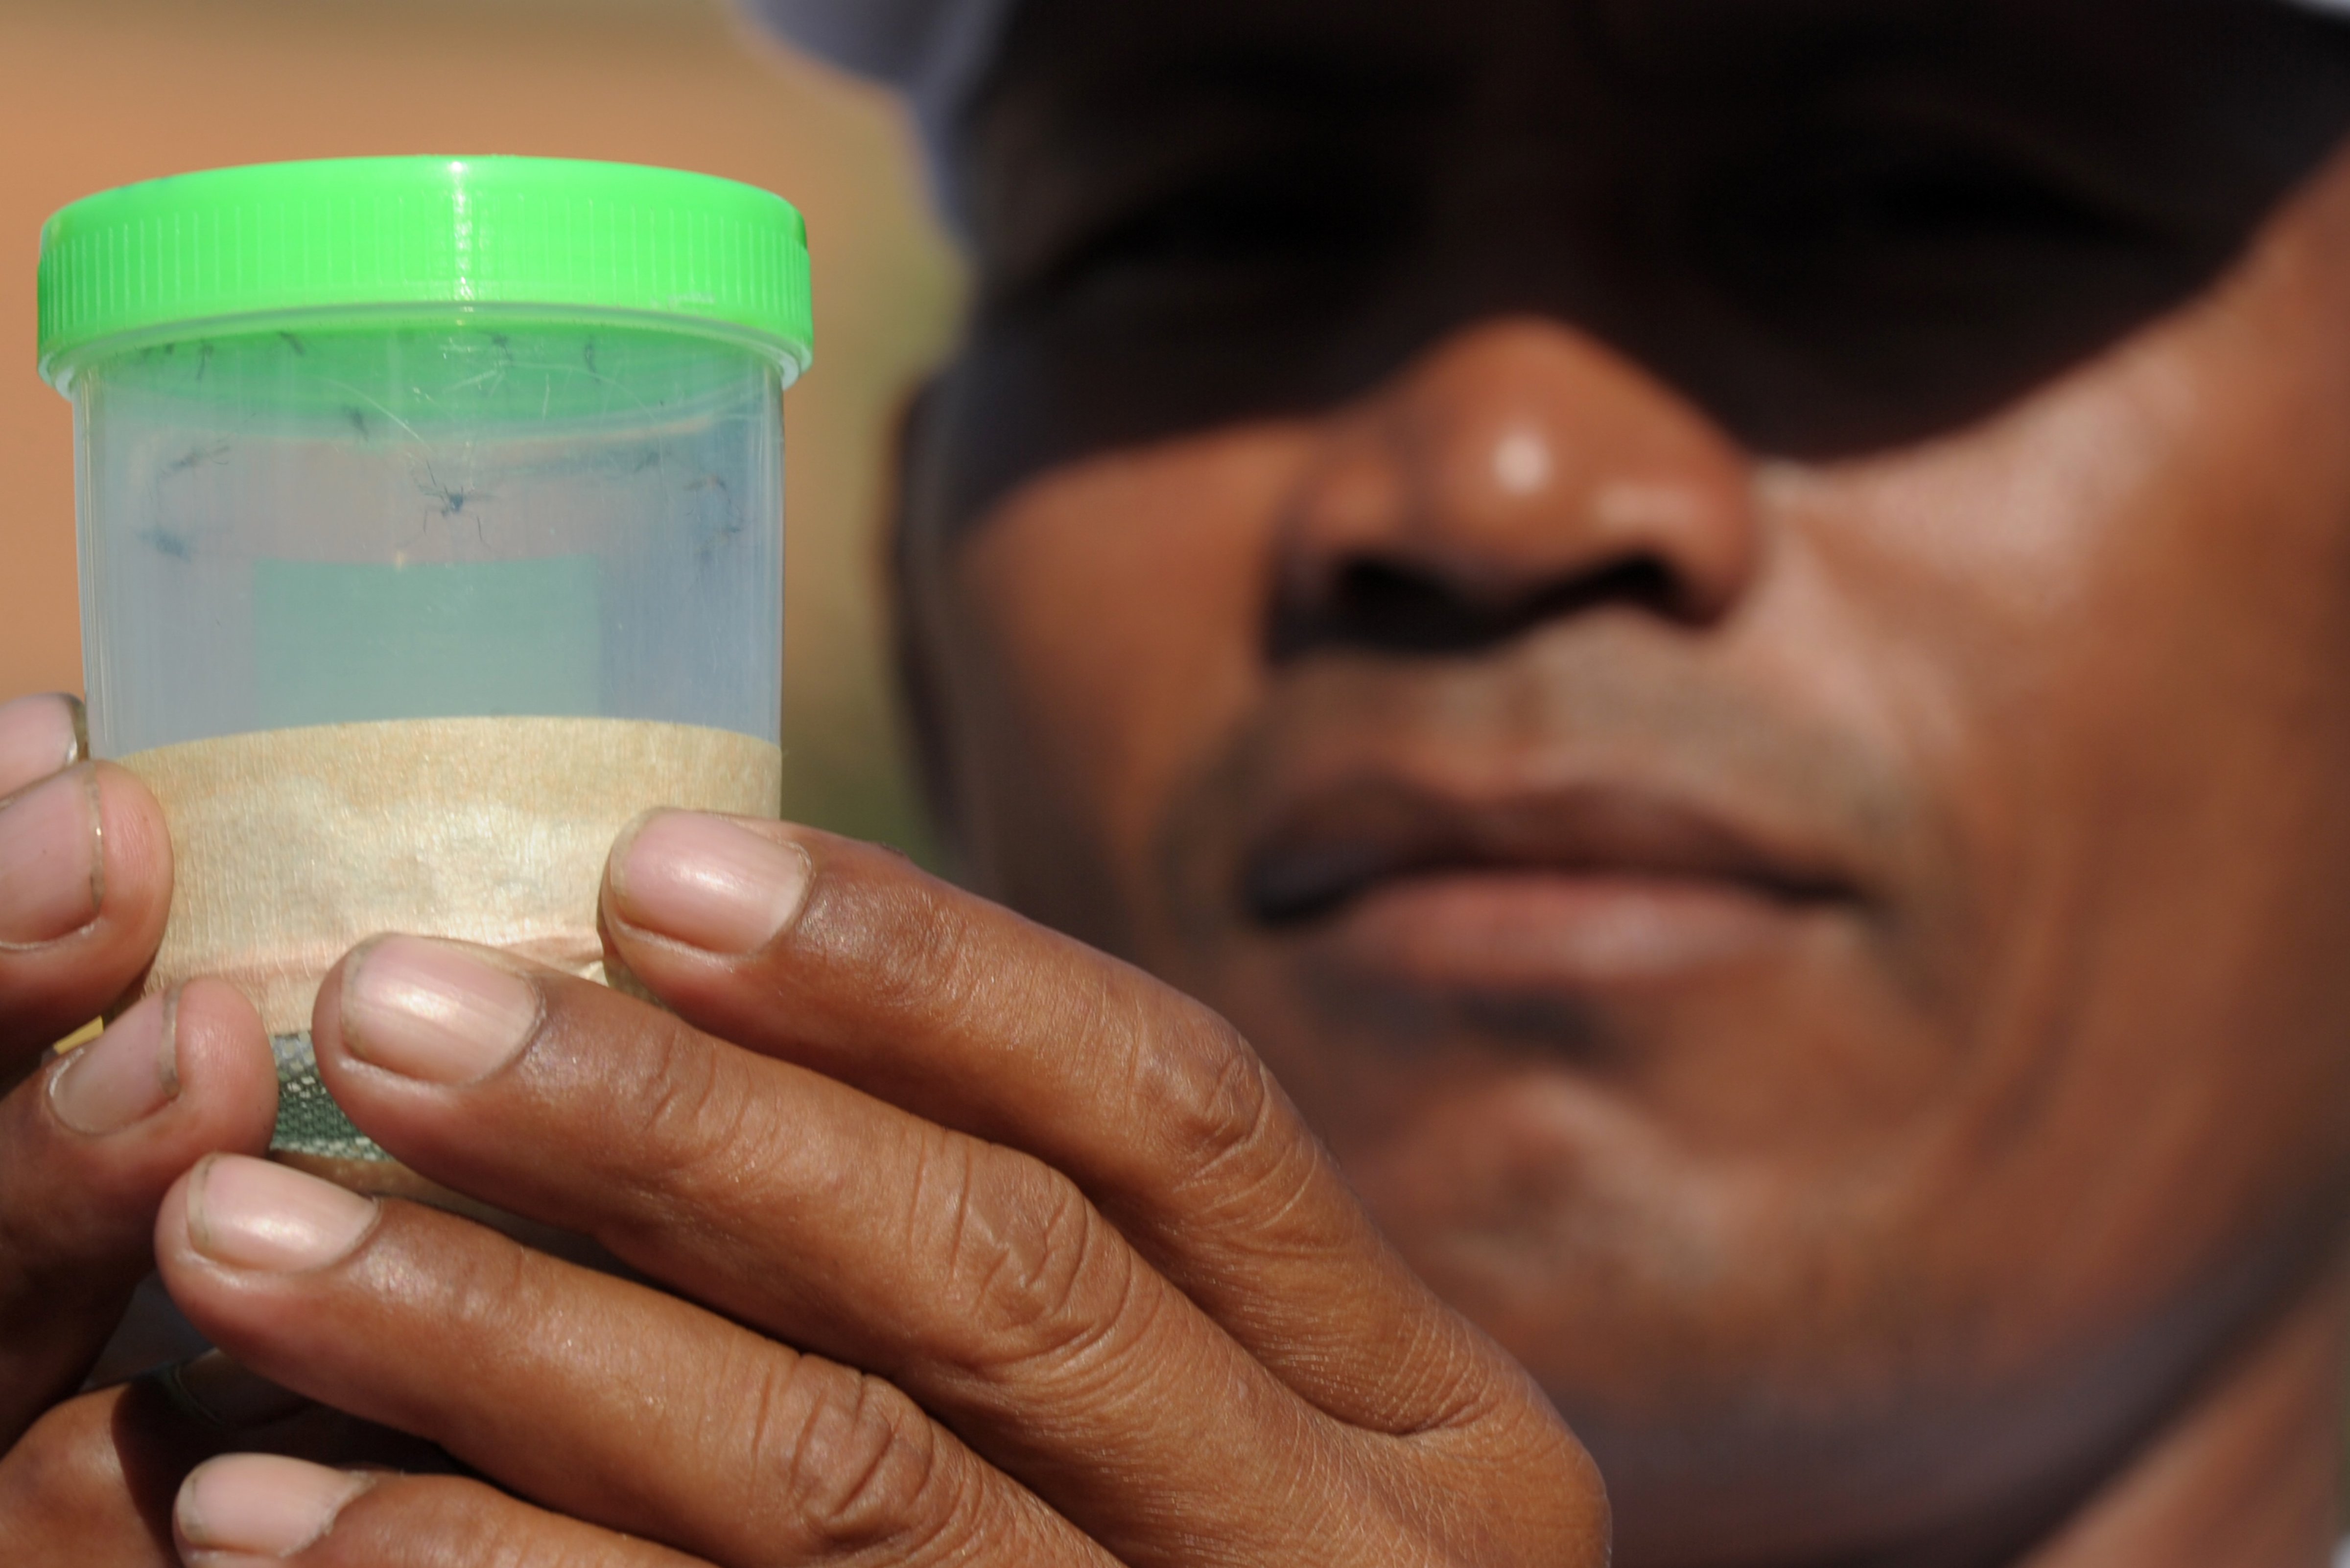 A Cambodian health official shows a bottle containing mosquitoes caught for testing in efforts to stem any outbreak of the Zika virus in Phnom Penh on Feb. 4, 2016 (Tang Chhin Sothy—AFP/Getty Images)